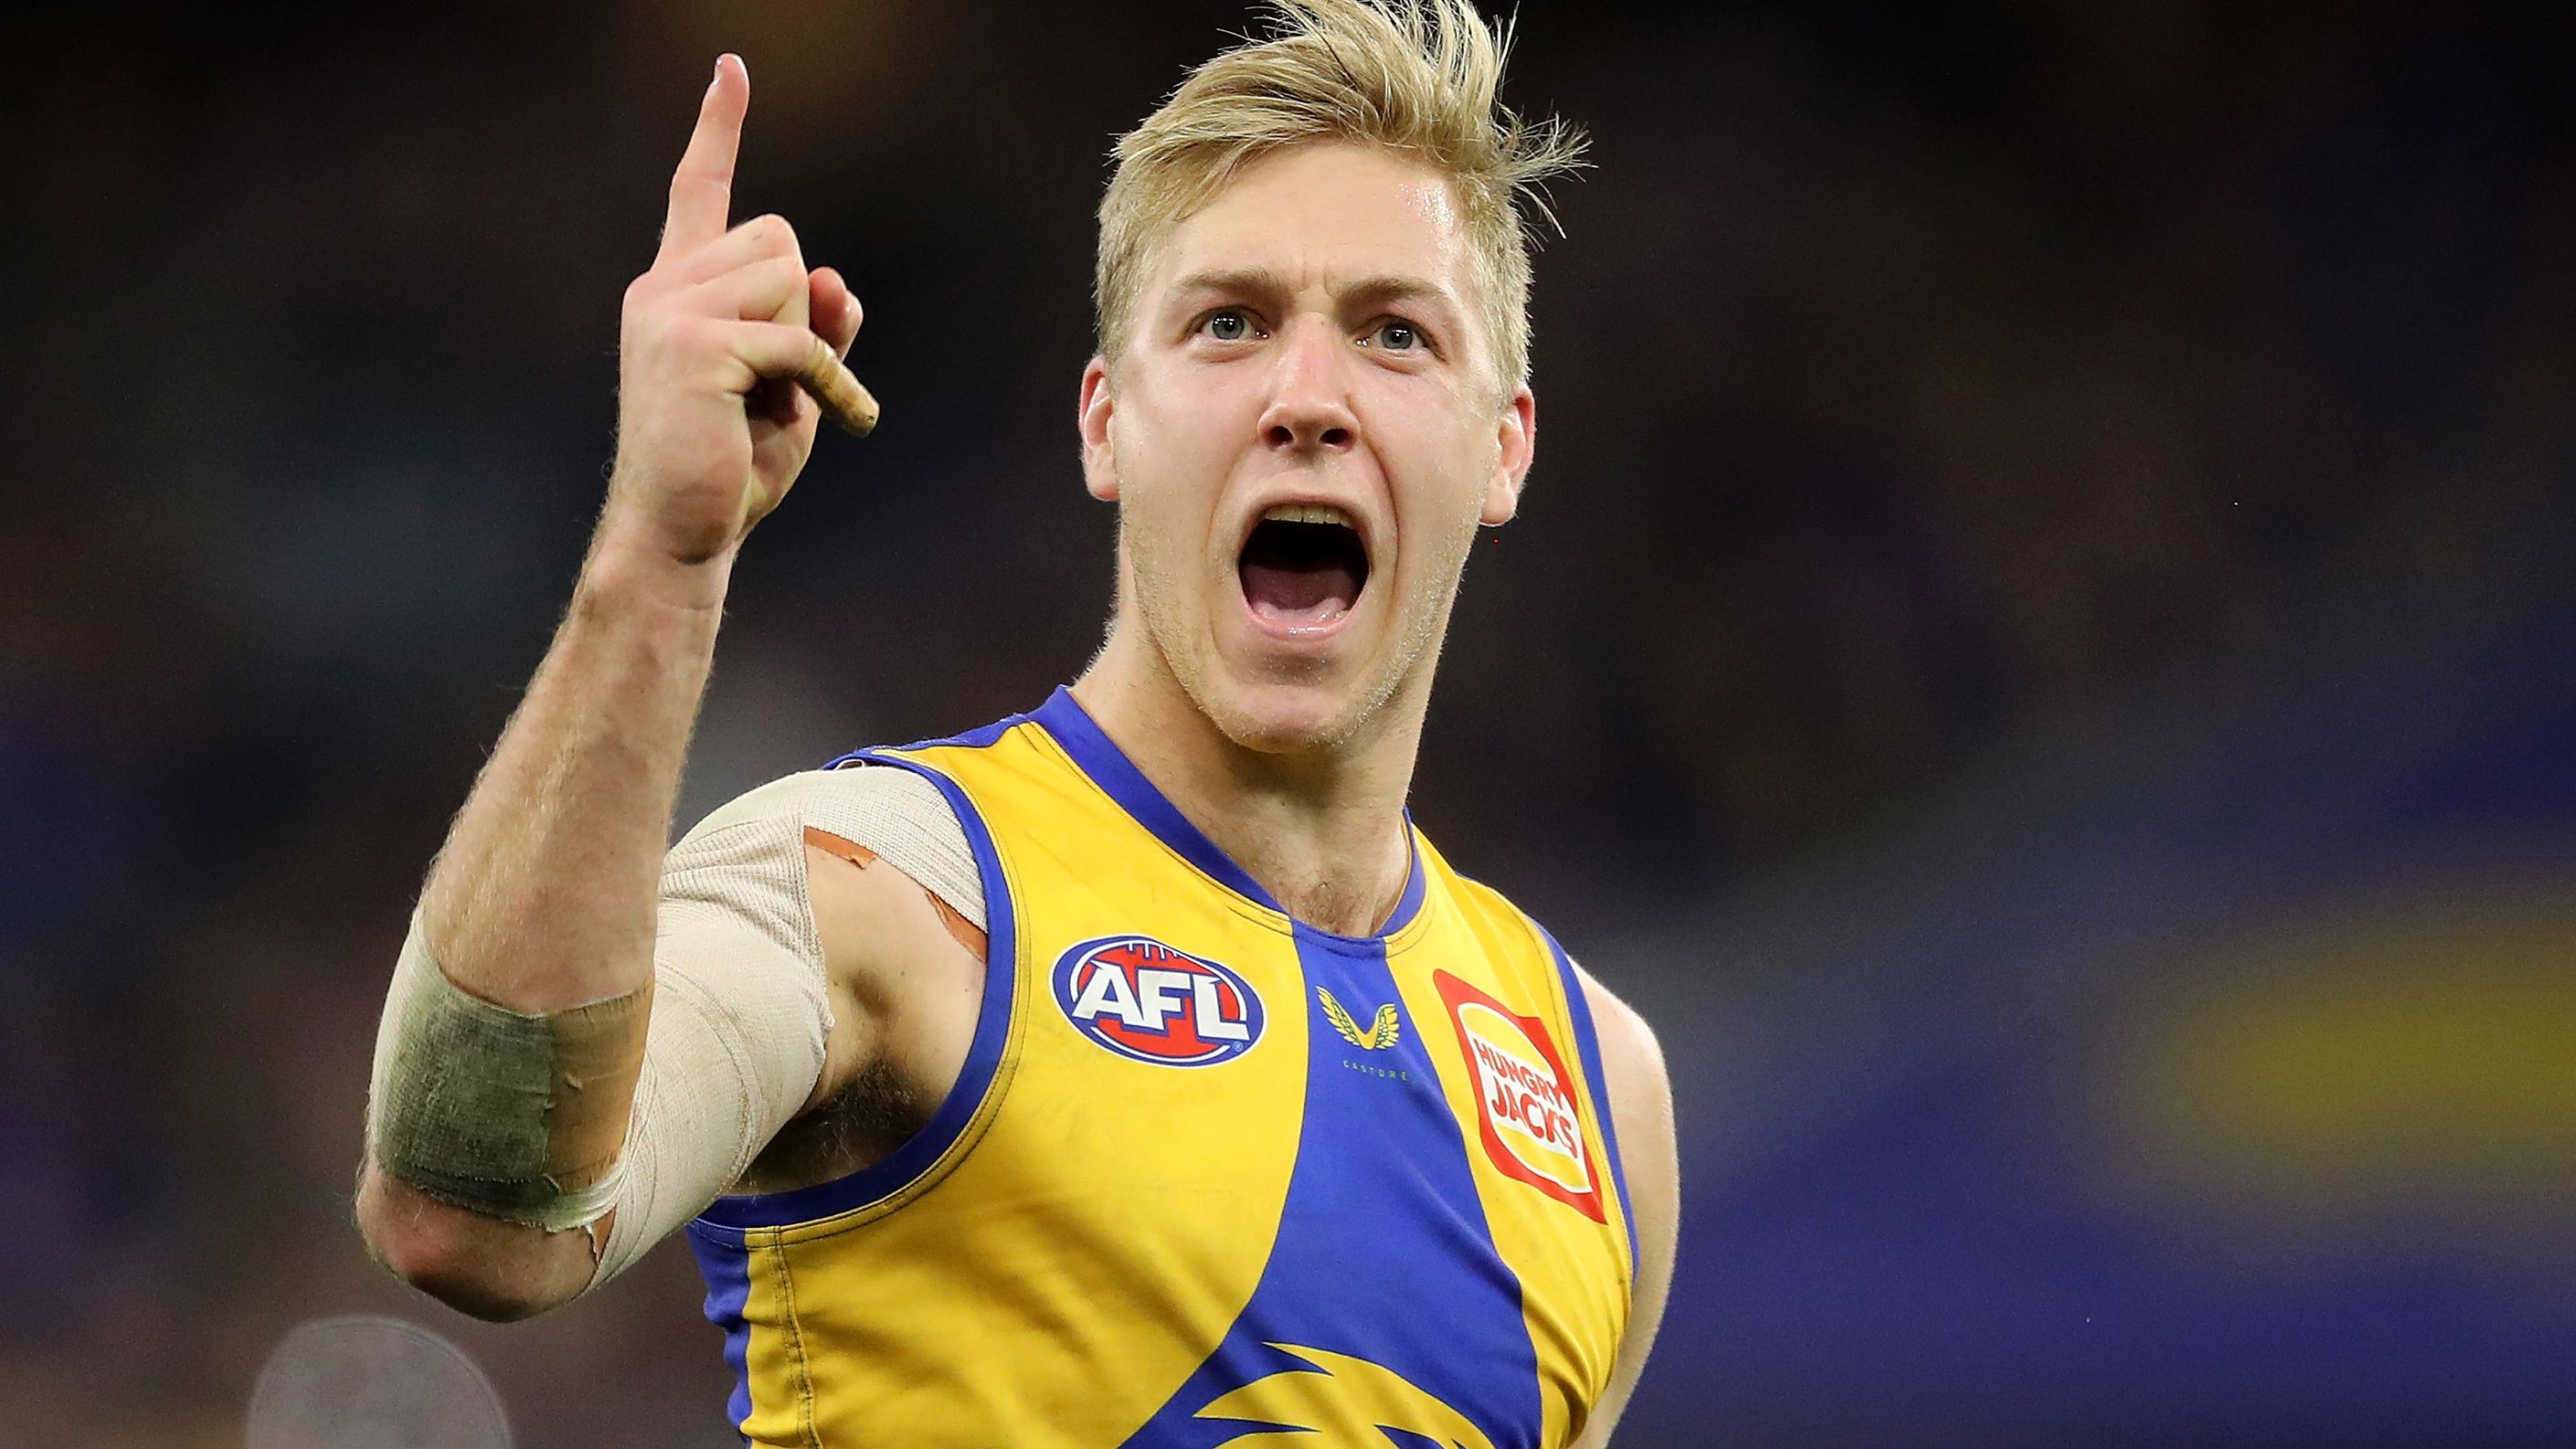 PERTH, AUSTRALIA - JUNE 13: Oscar Allen of the Eagles celebrates after scoring a goal during the 2021 AFL Round 13 match between the West Coast Eagles and the Richmond Tigers at Optus Stadium on June 13, 2021 in Perth, Australia. (Photo by Will Russell/AFL Photos)